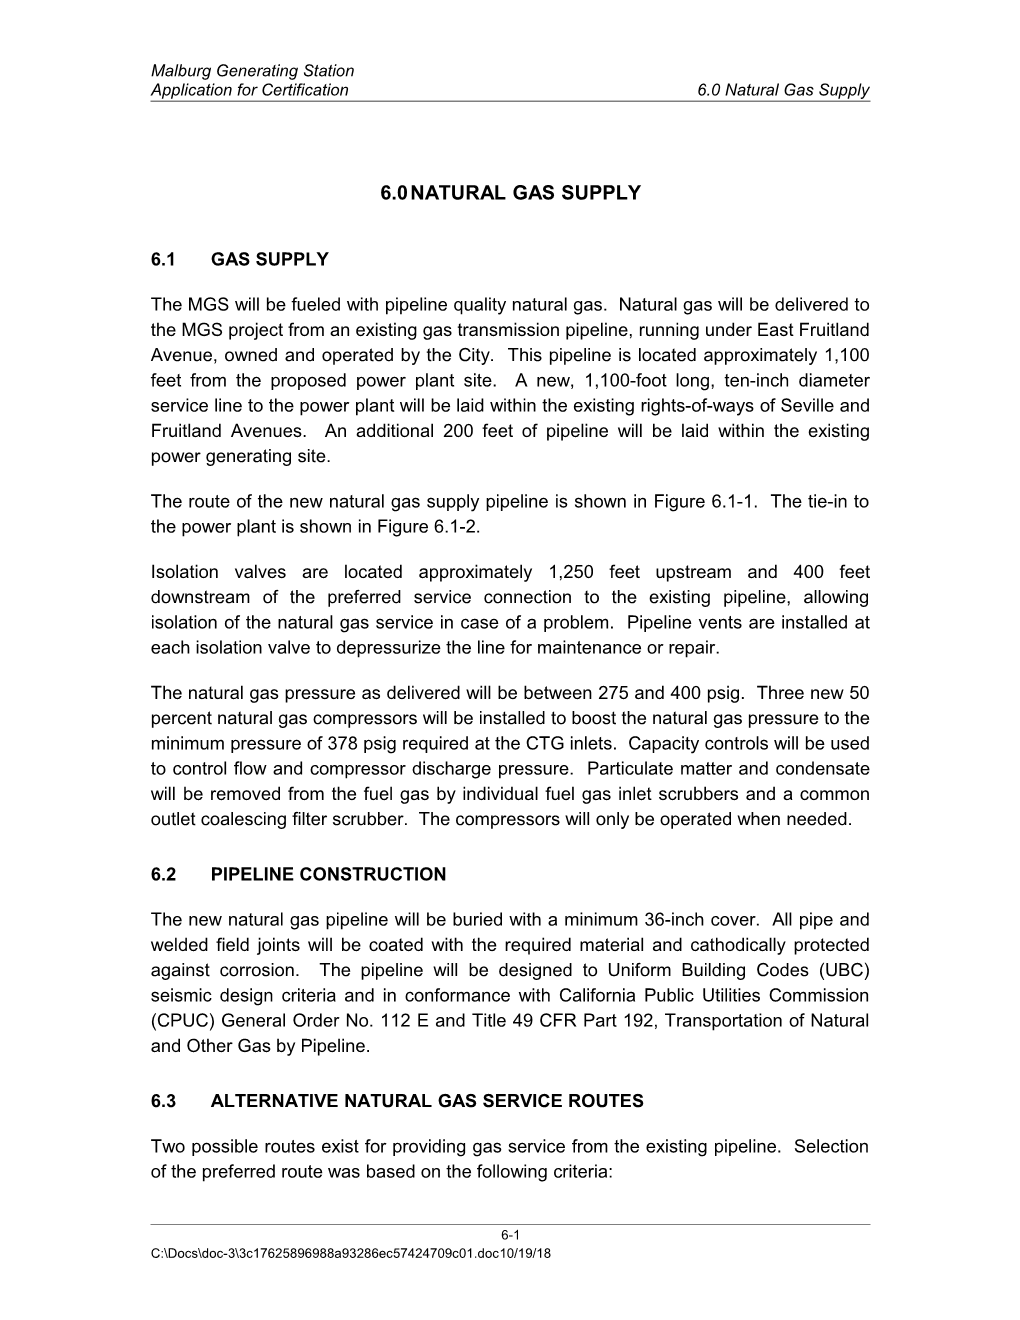 Application for Certification6.0 Natural Gas Supply